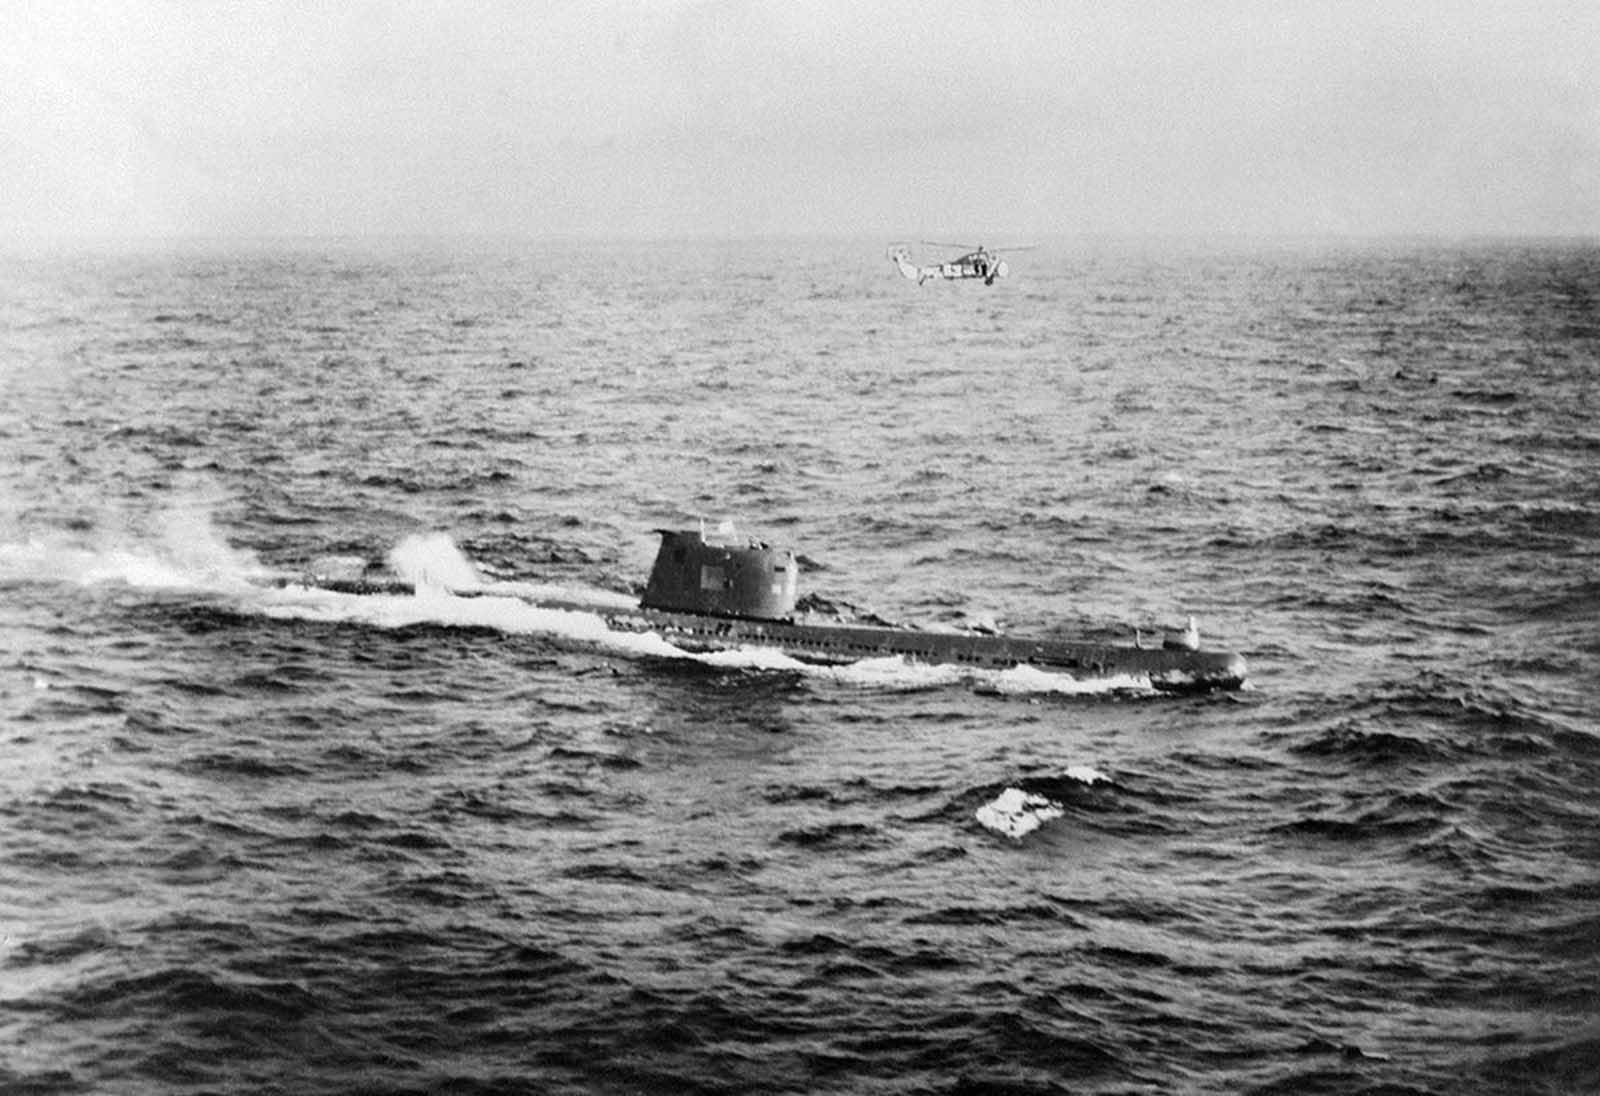 A Soviet submarine near the Cuban coast controlling the operations of withdrawal of the Russian Missiles from Cuba in accordance with the US-Soviet agreement, on November 10, 1962. American planes and helicopters flew at a low level to keep close check on the dismantling and loading operations, while US warships watched over Soviet freighters carrying missiles back to Soviet Union.